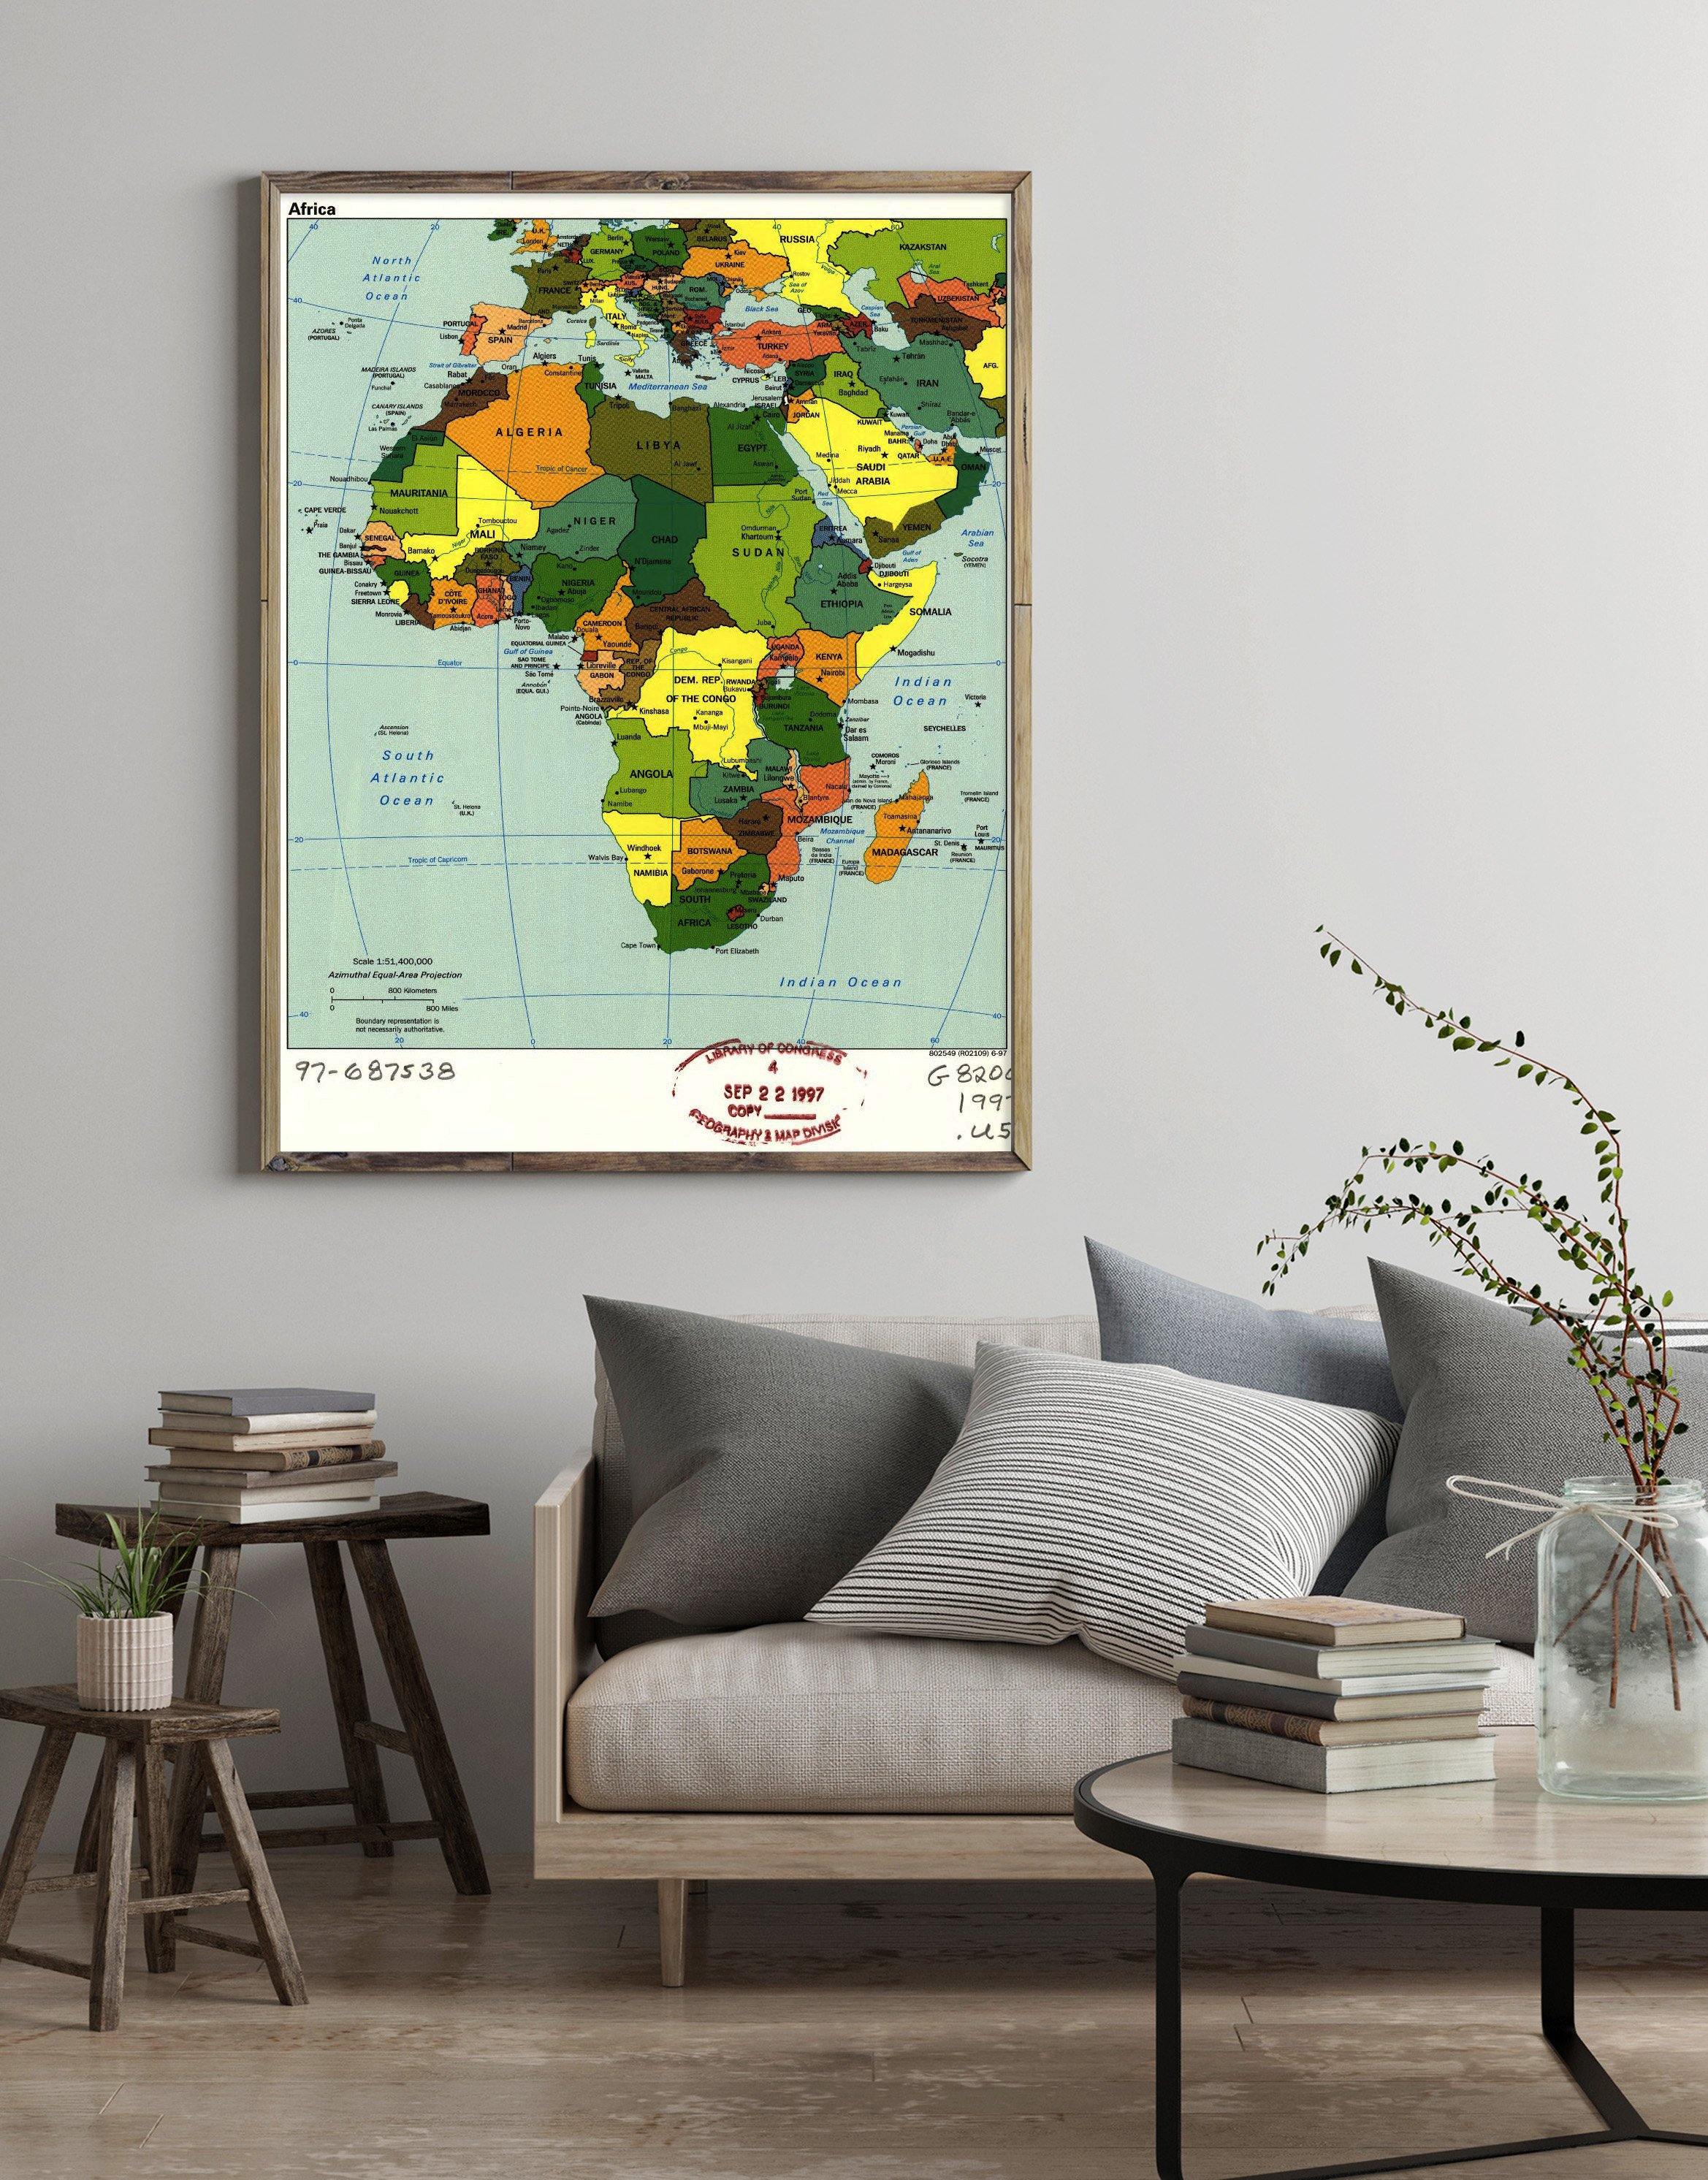 1997 Map| Africa| Africa Map Size: 18 inches x 24 inches |Fits 18x24 s - New York Map Company